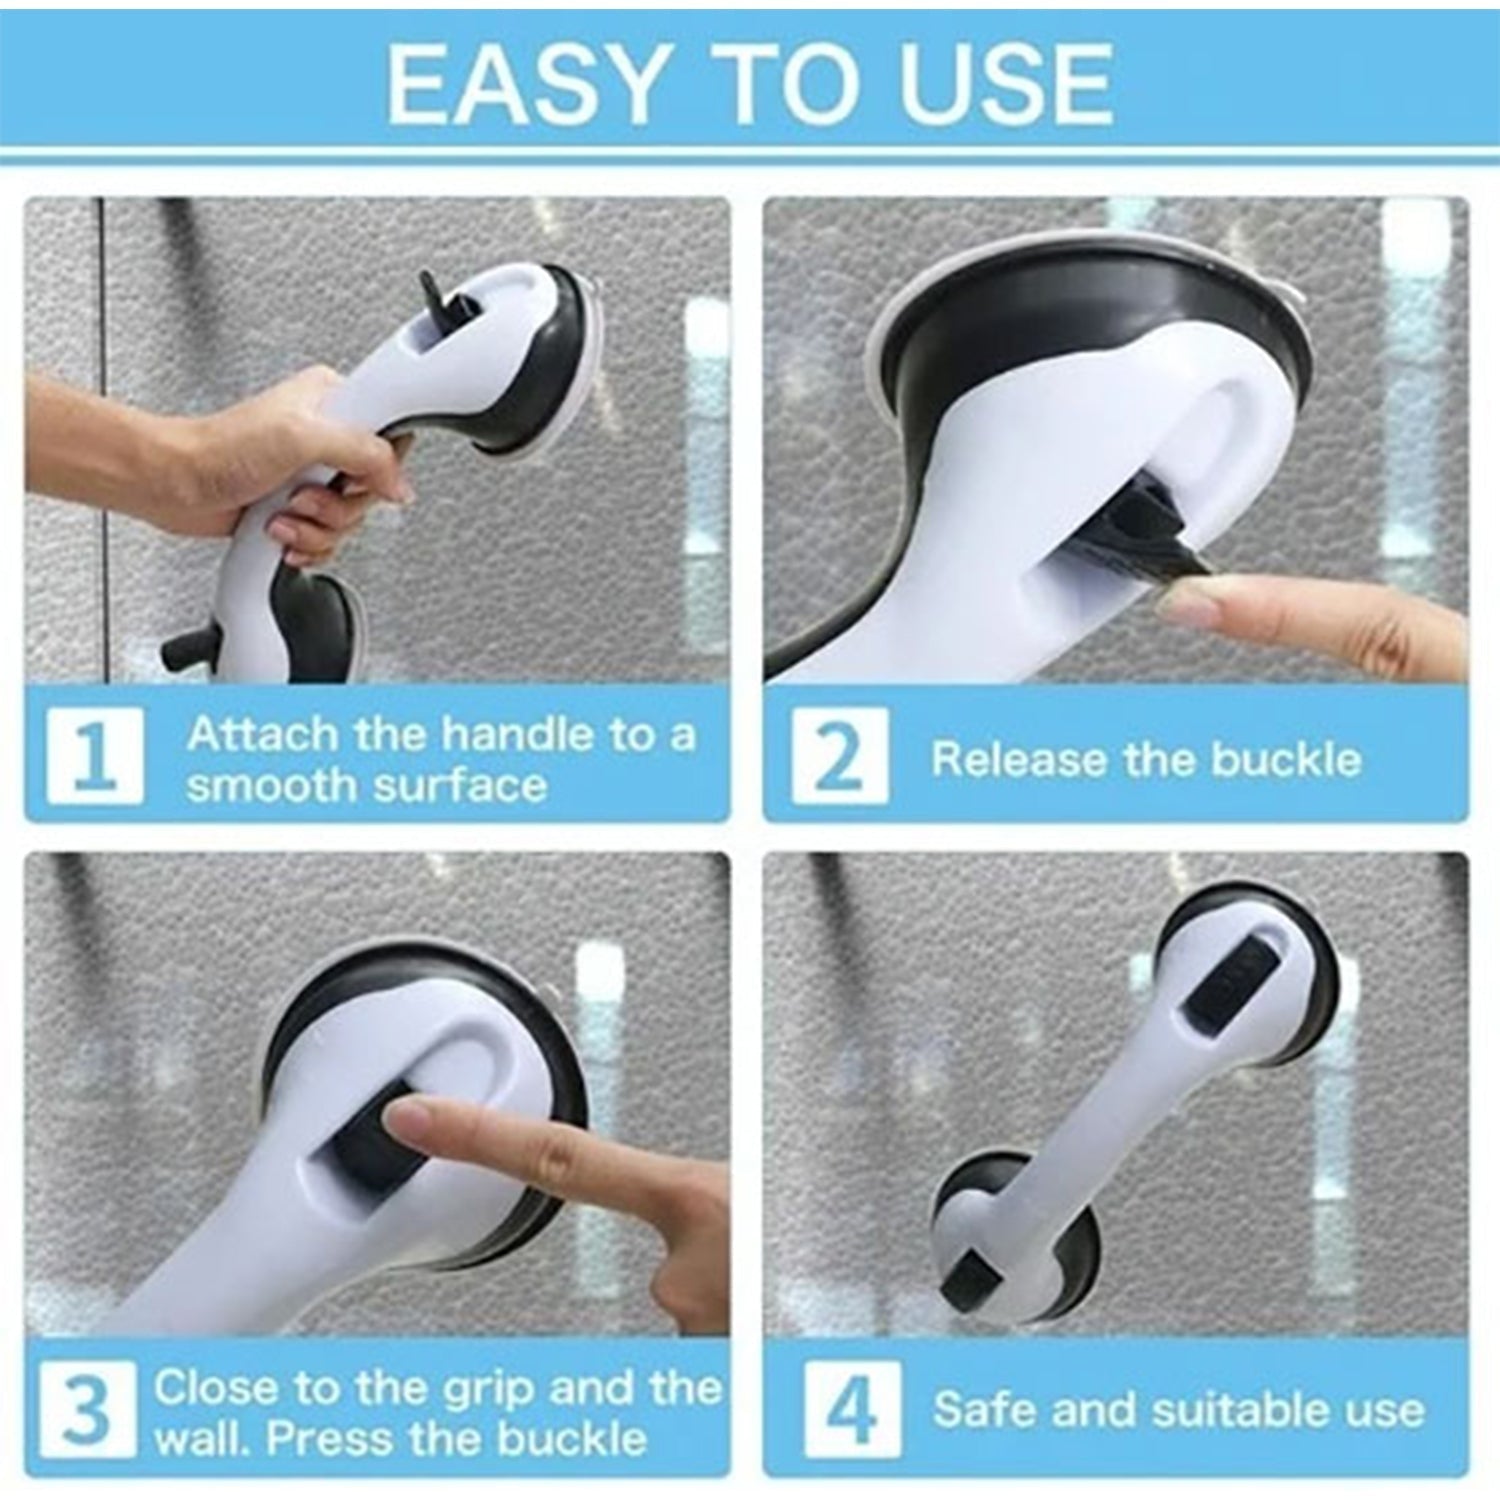 6148 Helping Handle used to give a helpful handle in case of door stuck and lack of opening it and all purposes, and can be used in mostly any kinds of places like offices and household etc - DeoDap